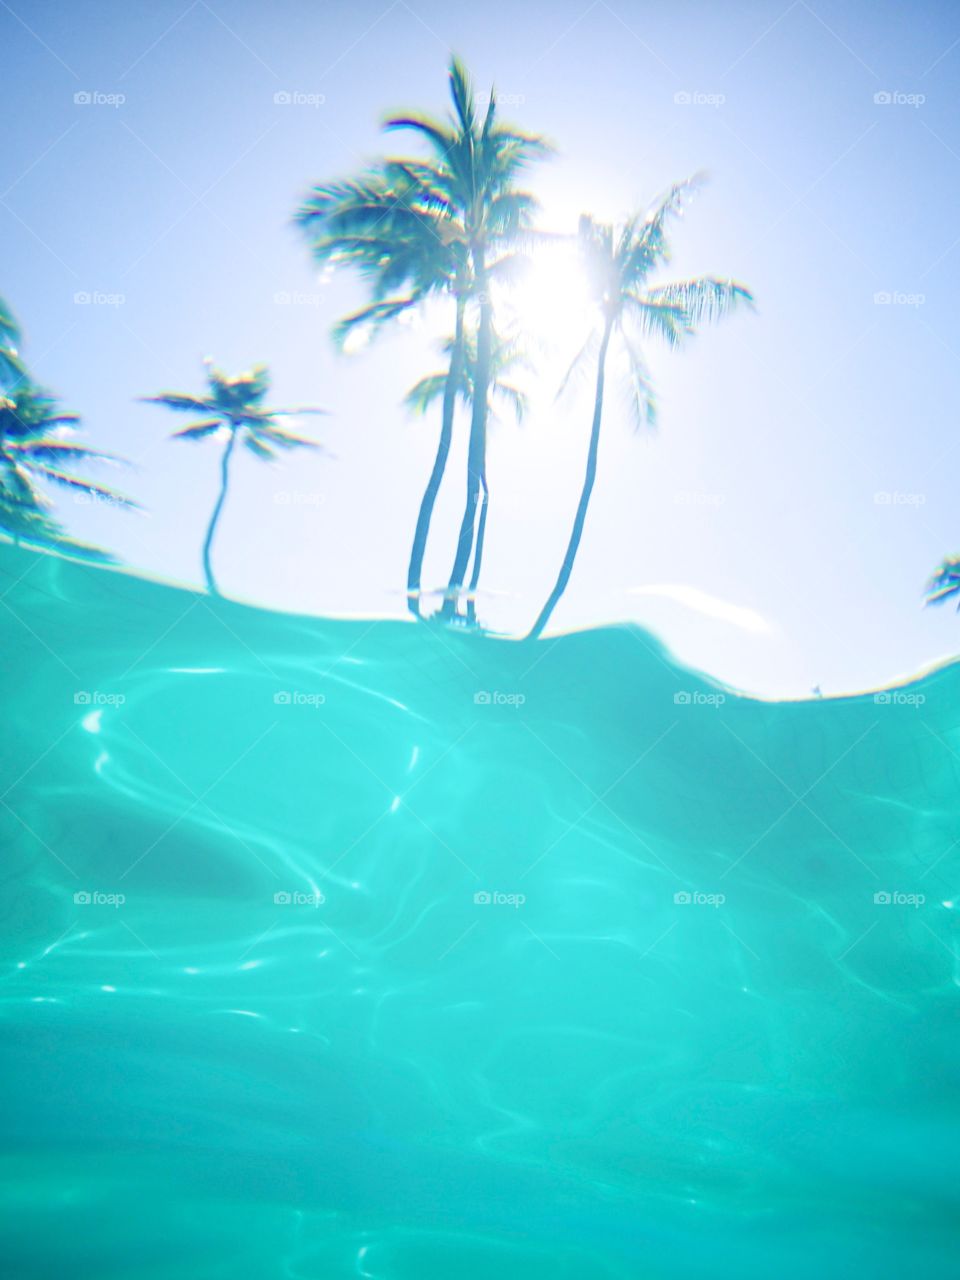 Looking up at Palm trees while underwater